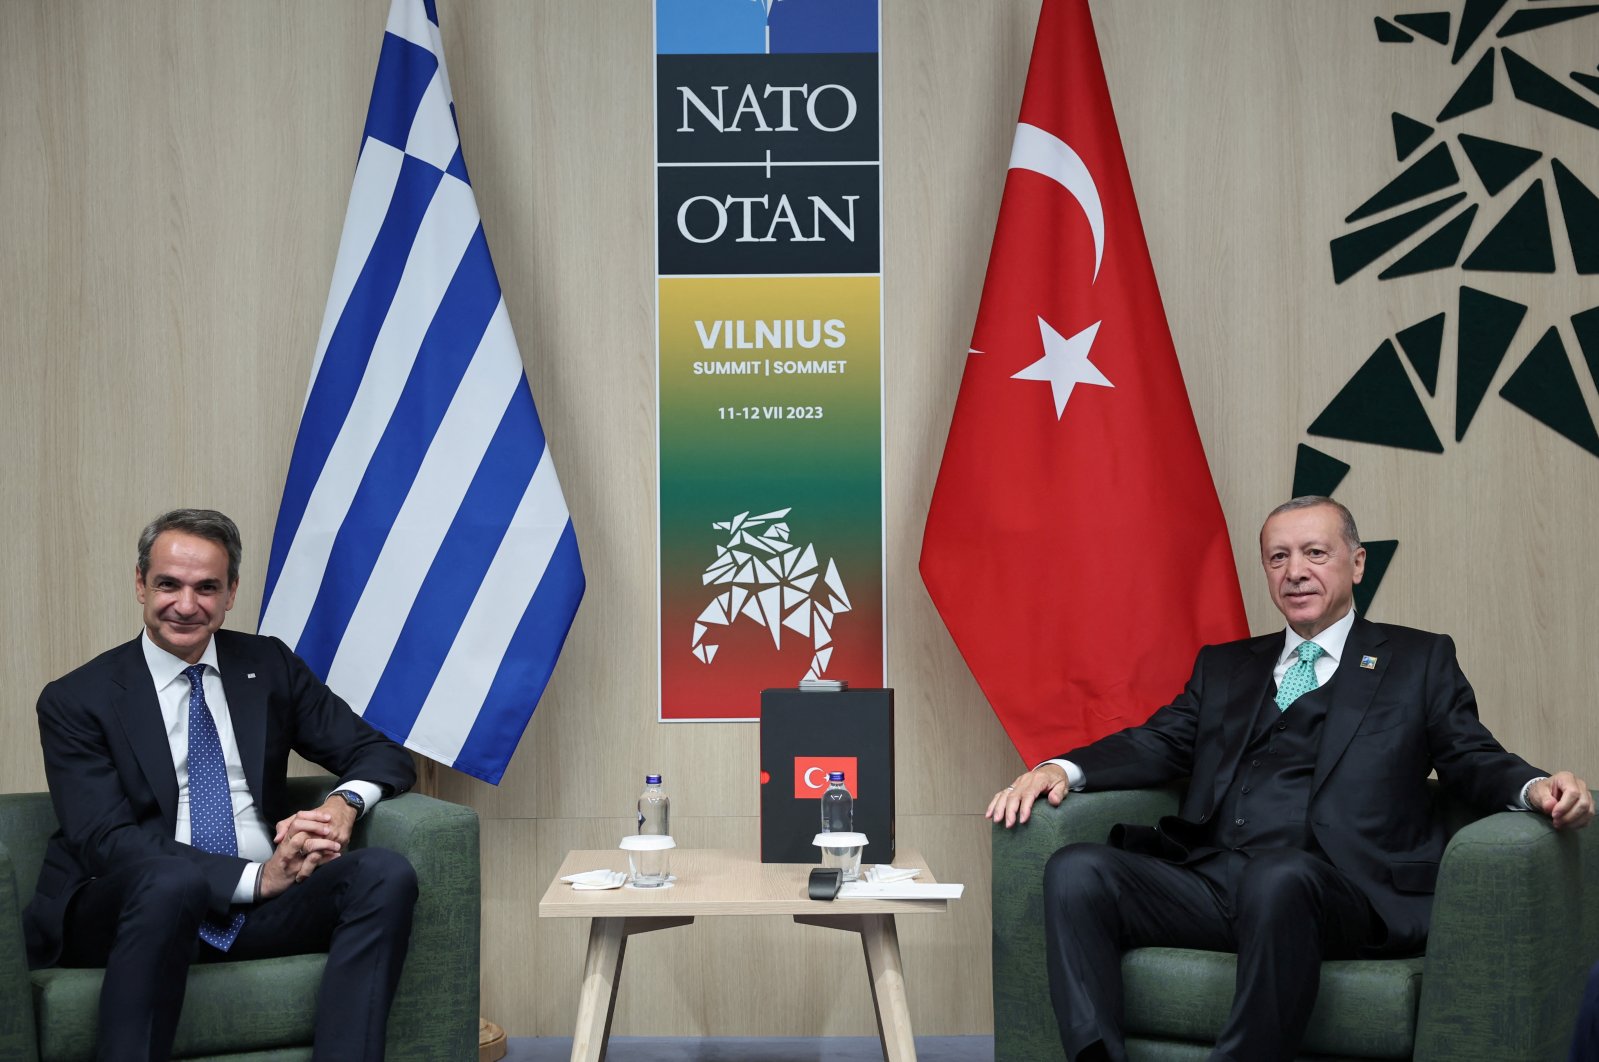 President Recep Tayyip Erdoğan meets with Greek Prime Minister Kyriakos Mitsotakis during a NATO leaders summit in Vilnius, Lithuania, July 12, 2023. (Reuters Photo)